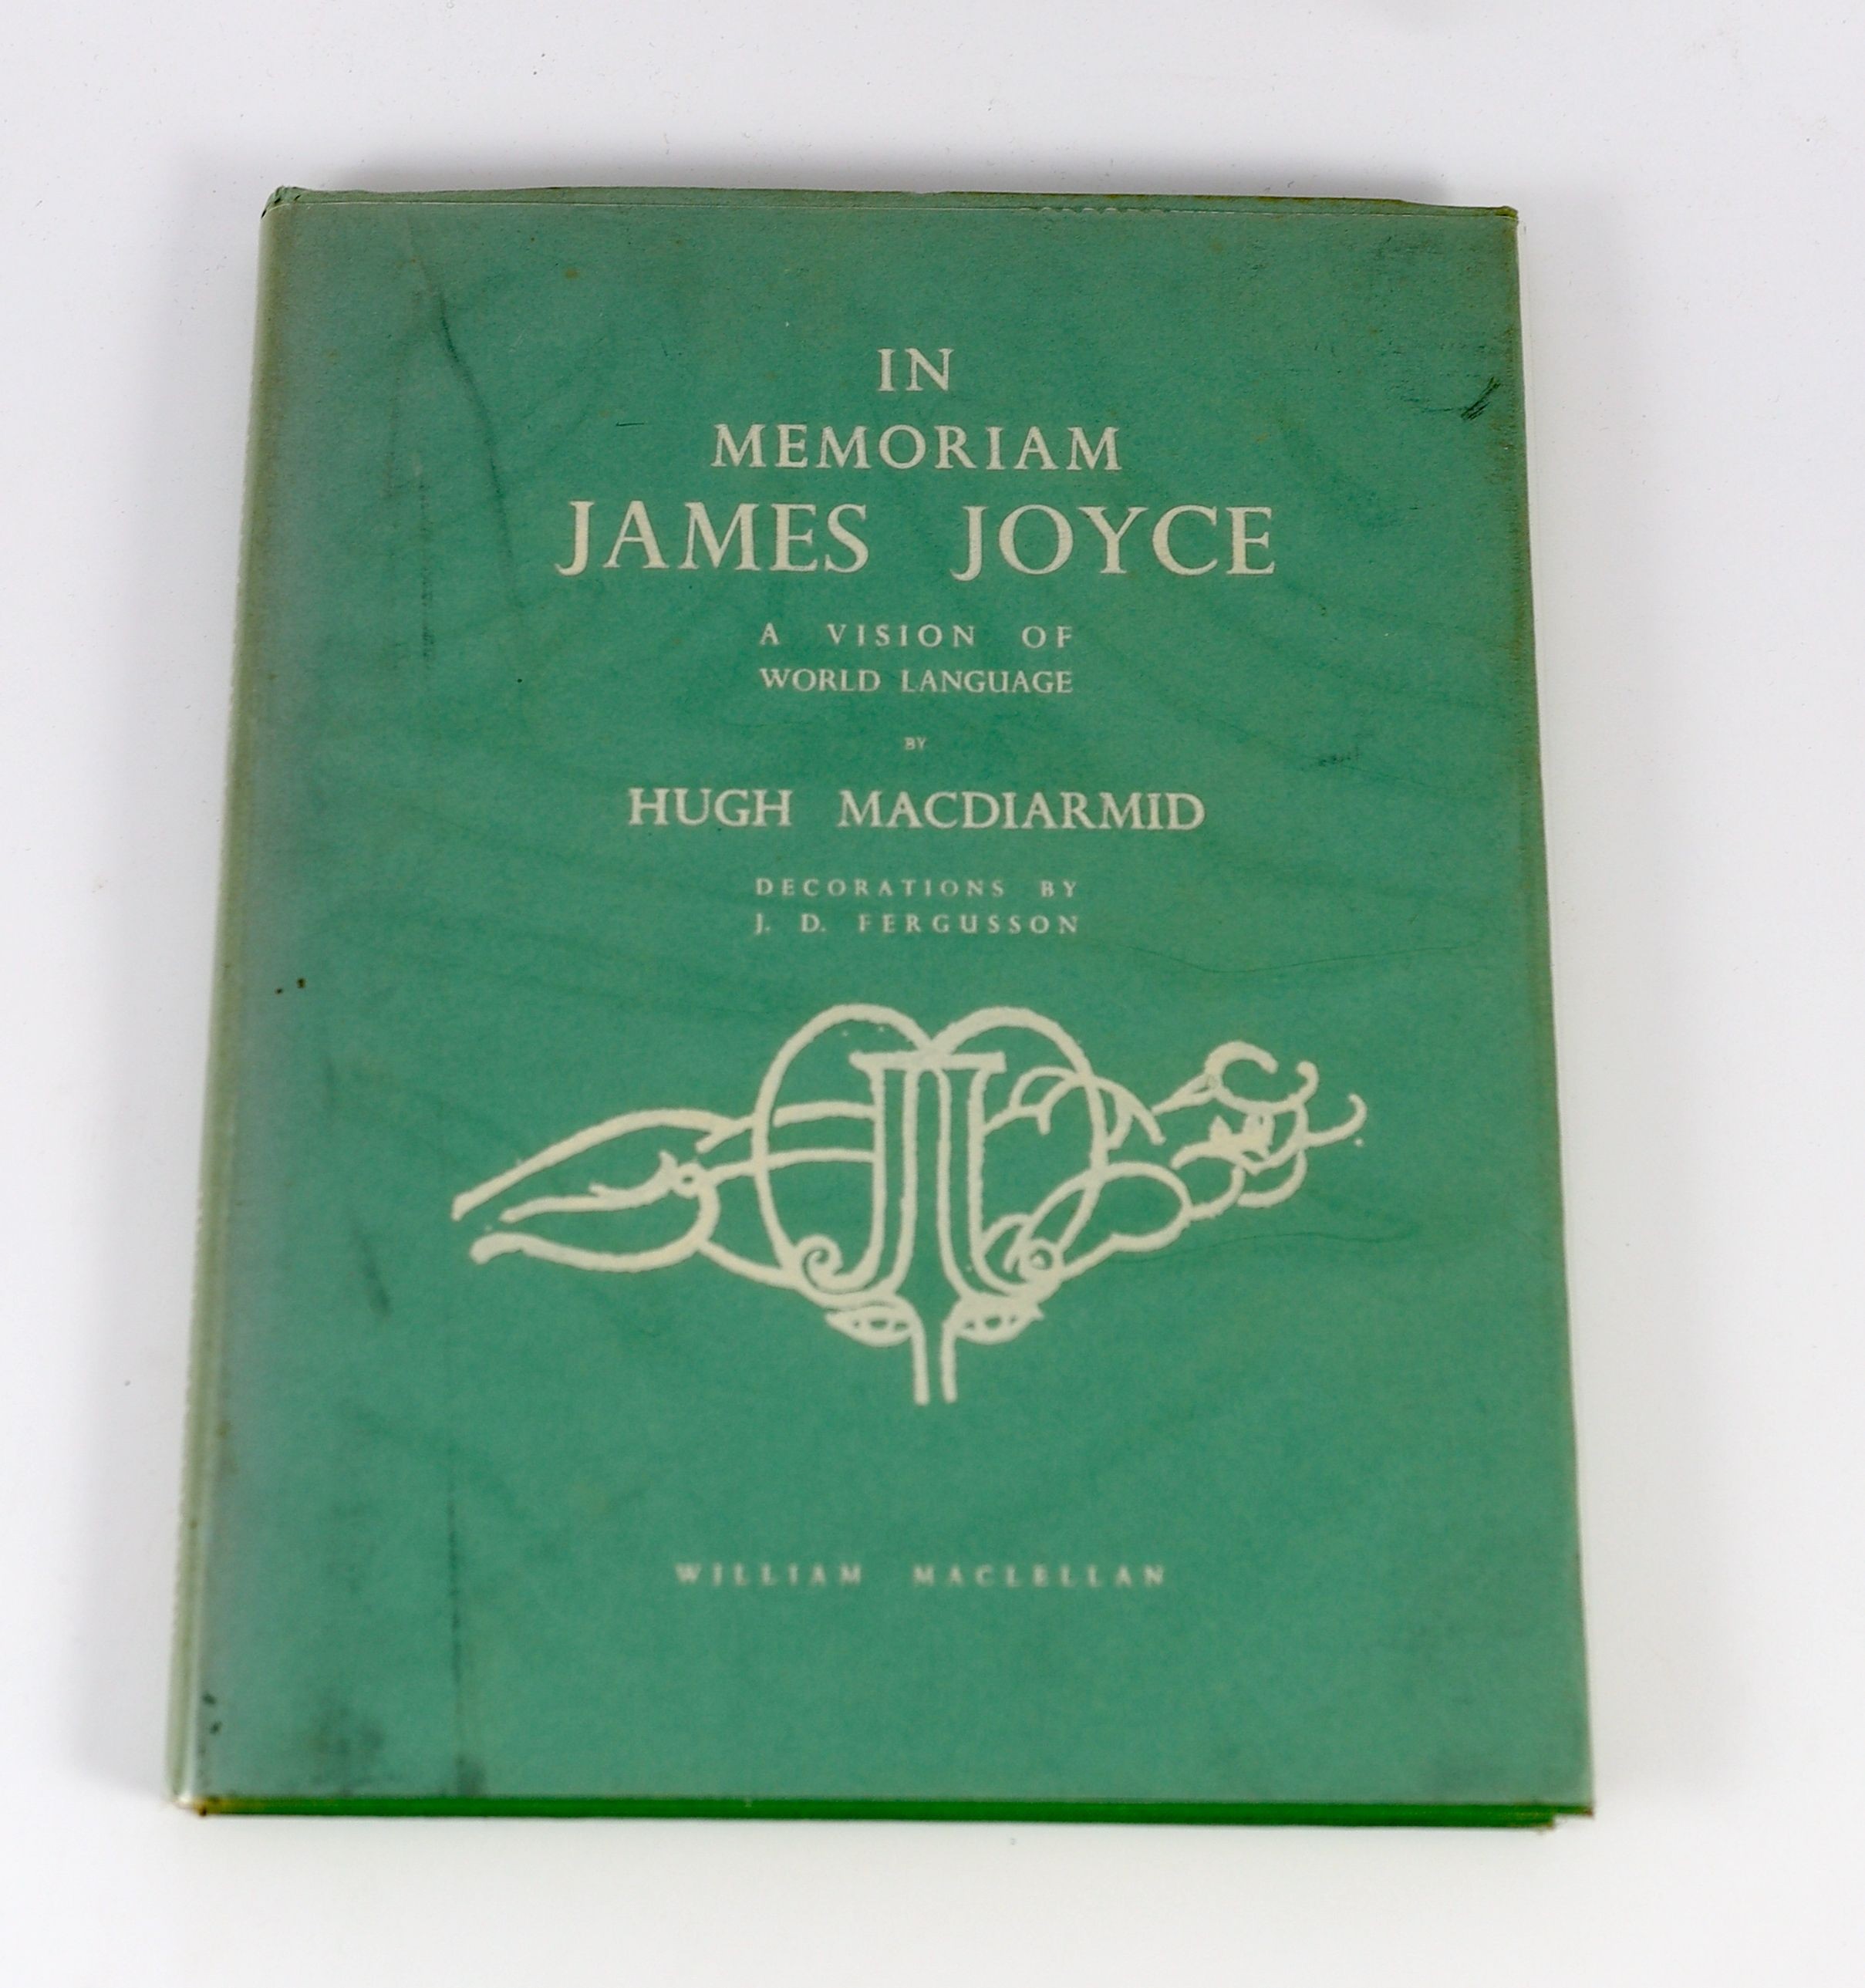 MacDiarmid, Hugh - In Memoriam James Joyce from a Vision of World Language. 1st ed. with numerous text illustrations, publishers cloth with gilt letters direct on spine and device on upper. Original titled d/j. Dyed top